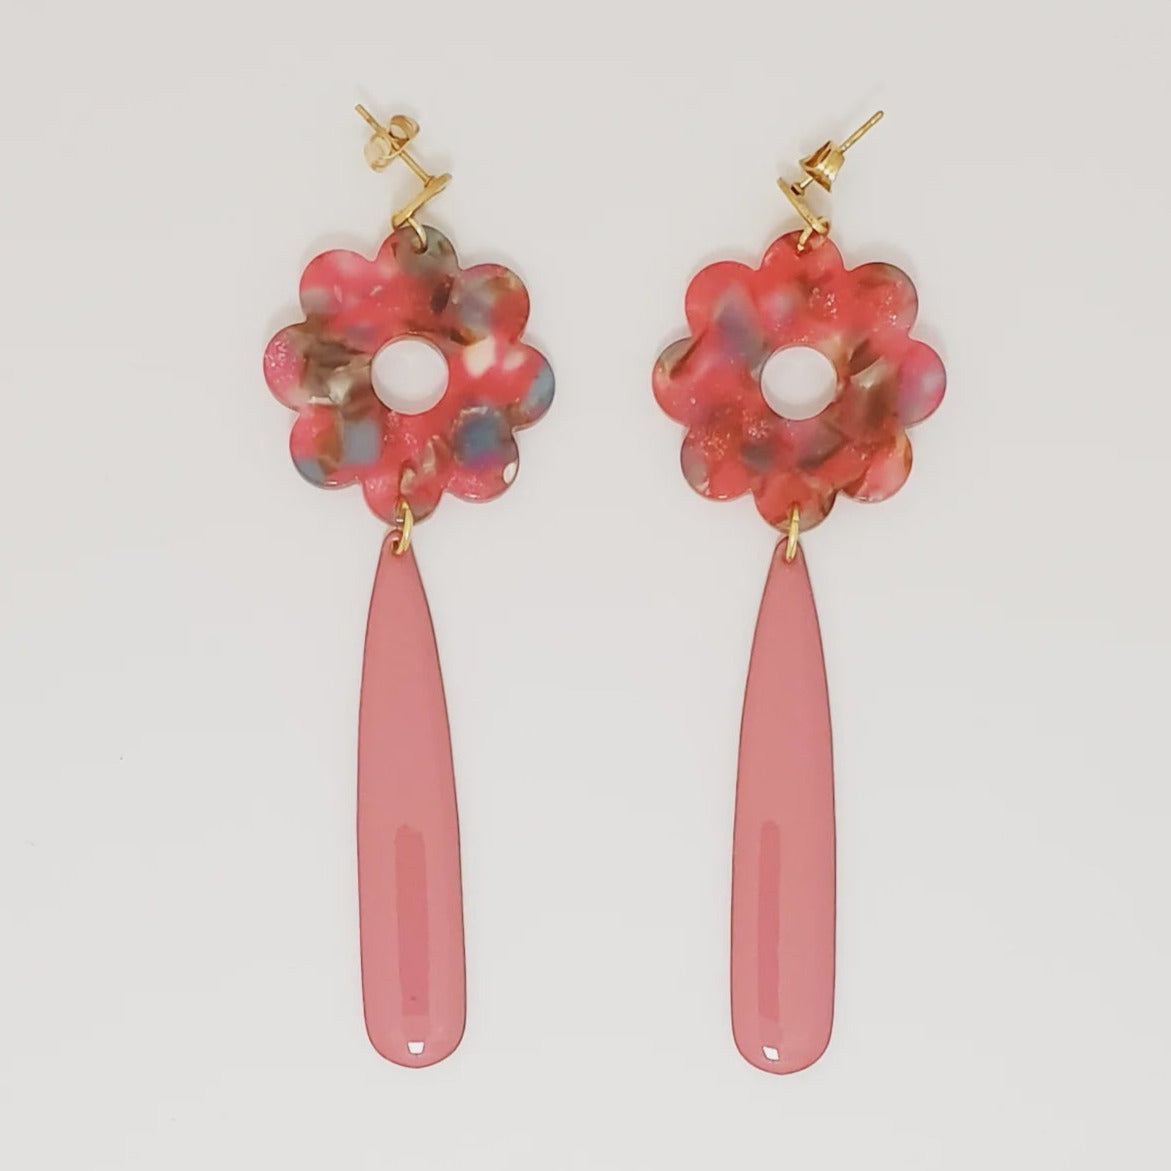 Middle Child Tootsie Earrings - Pink